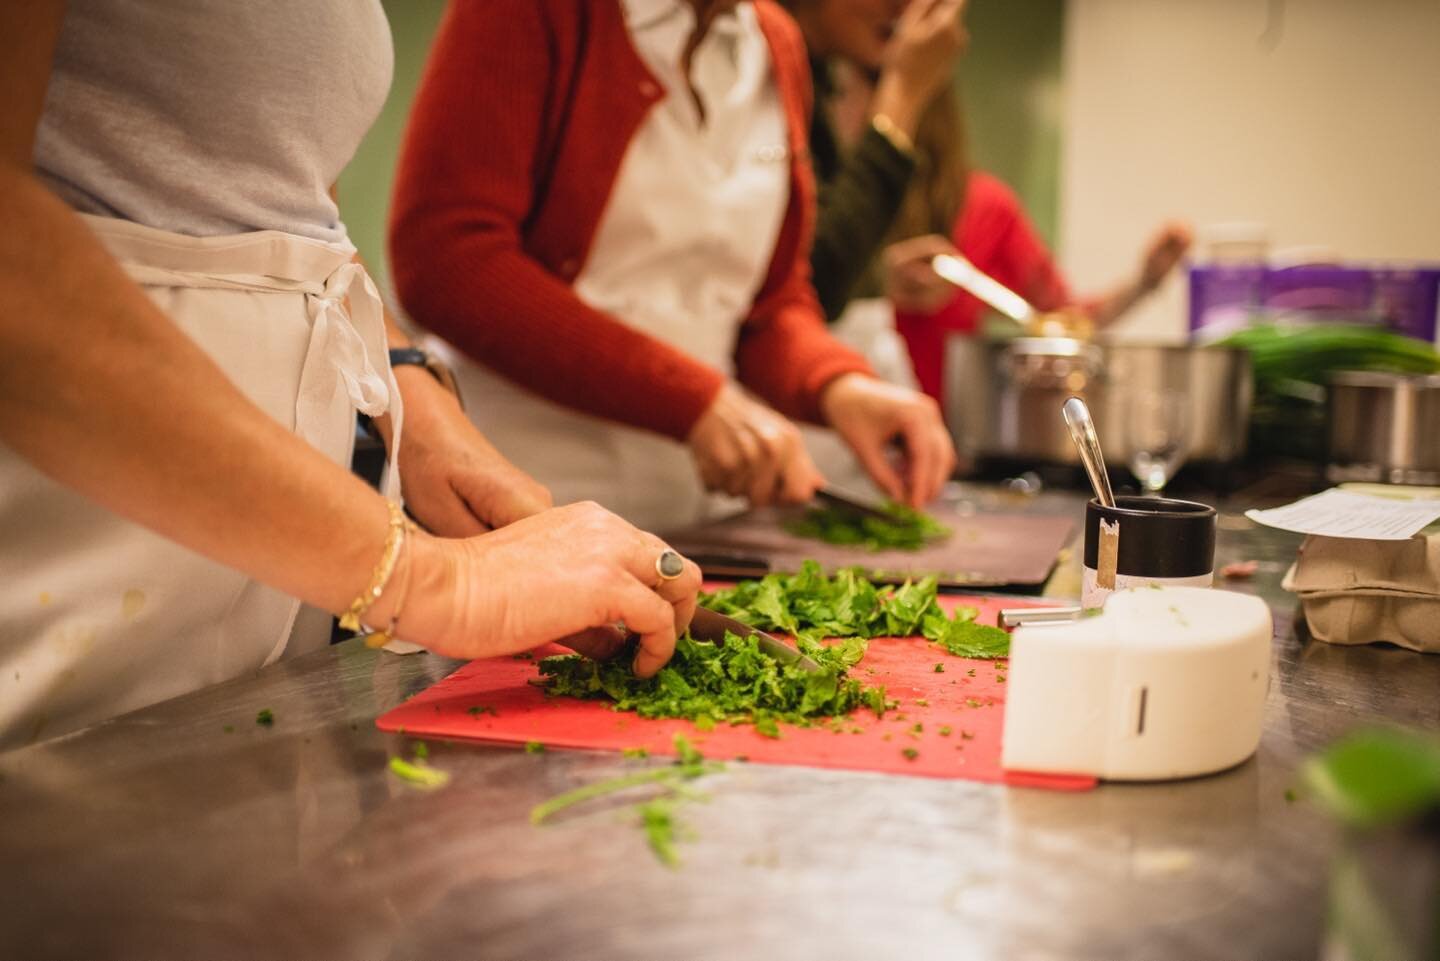 We still have some spots left for our cooking class on 26/4 ⚡️

Want to join? We&rsquo;ll be cooking up a storm with some wonderful veggie and plant based dishes 💚 

Drop us a message: contact@debroersvanjuliennebe